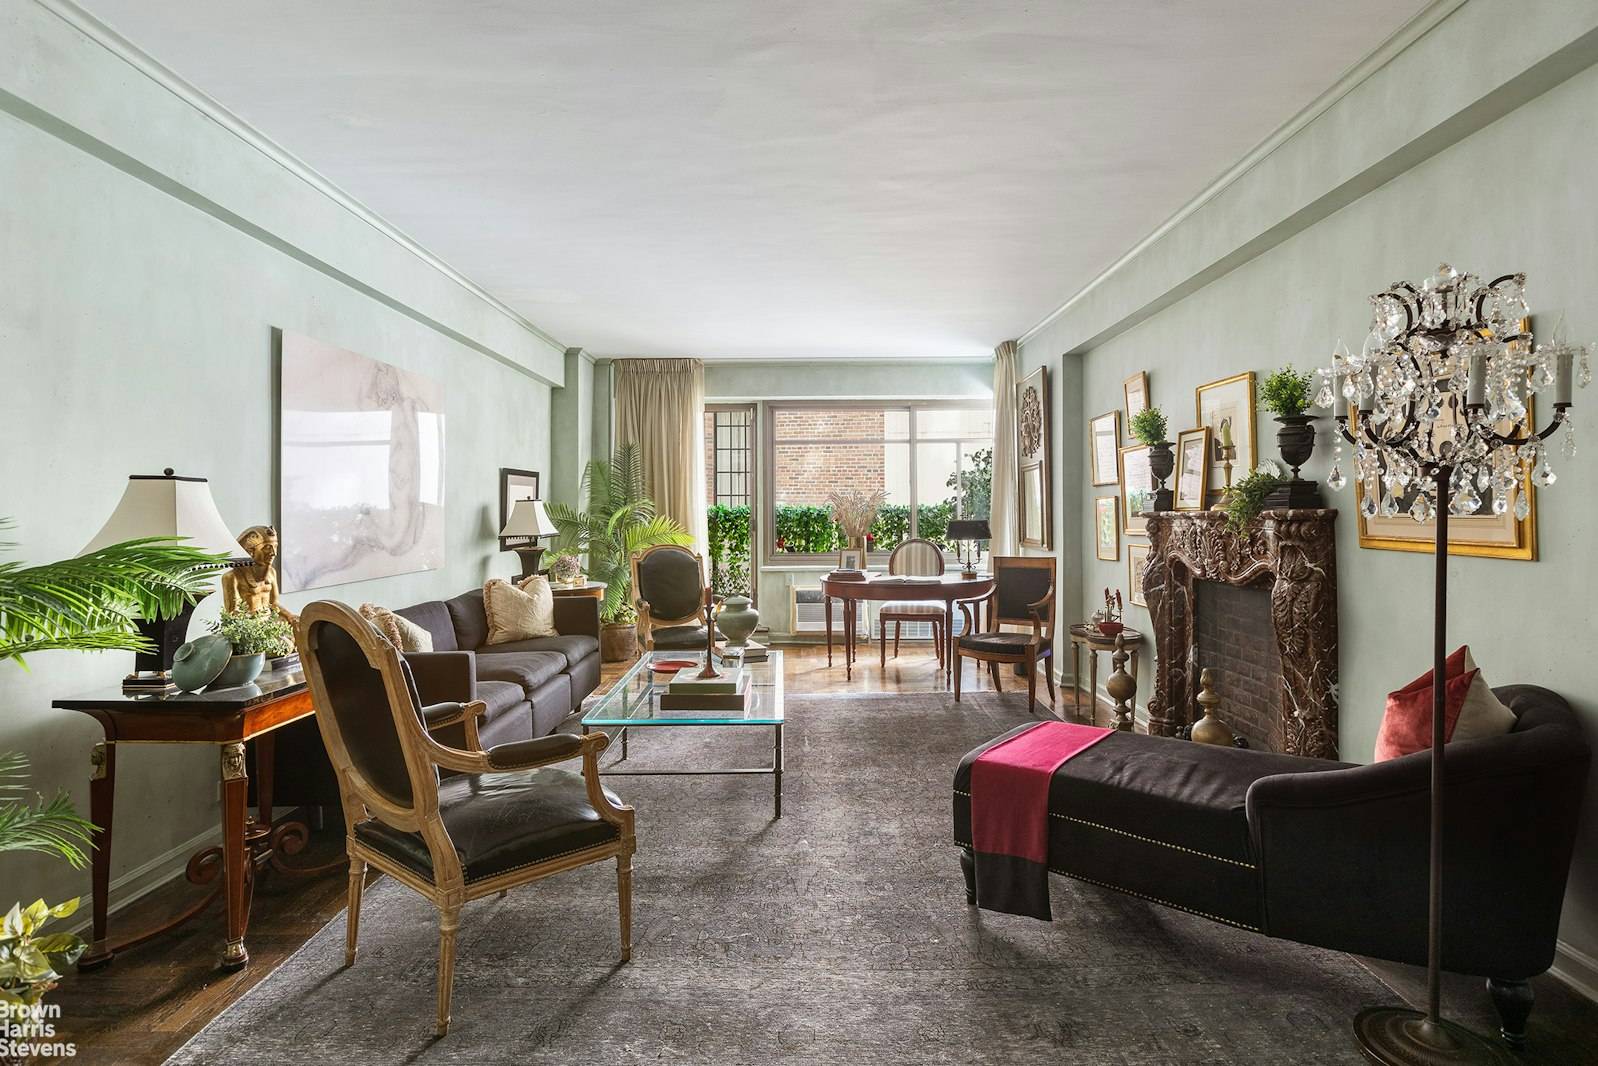 Spacious Lenox Hill CondoIntroducing Residence 2E at 715 Park Avenue, a well appointed one bedroom condo in the coveted Lenox Hill neighborhood.